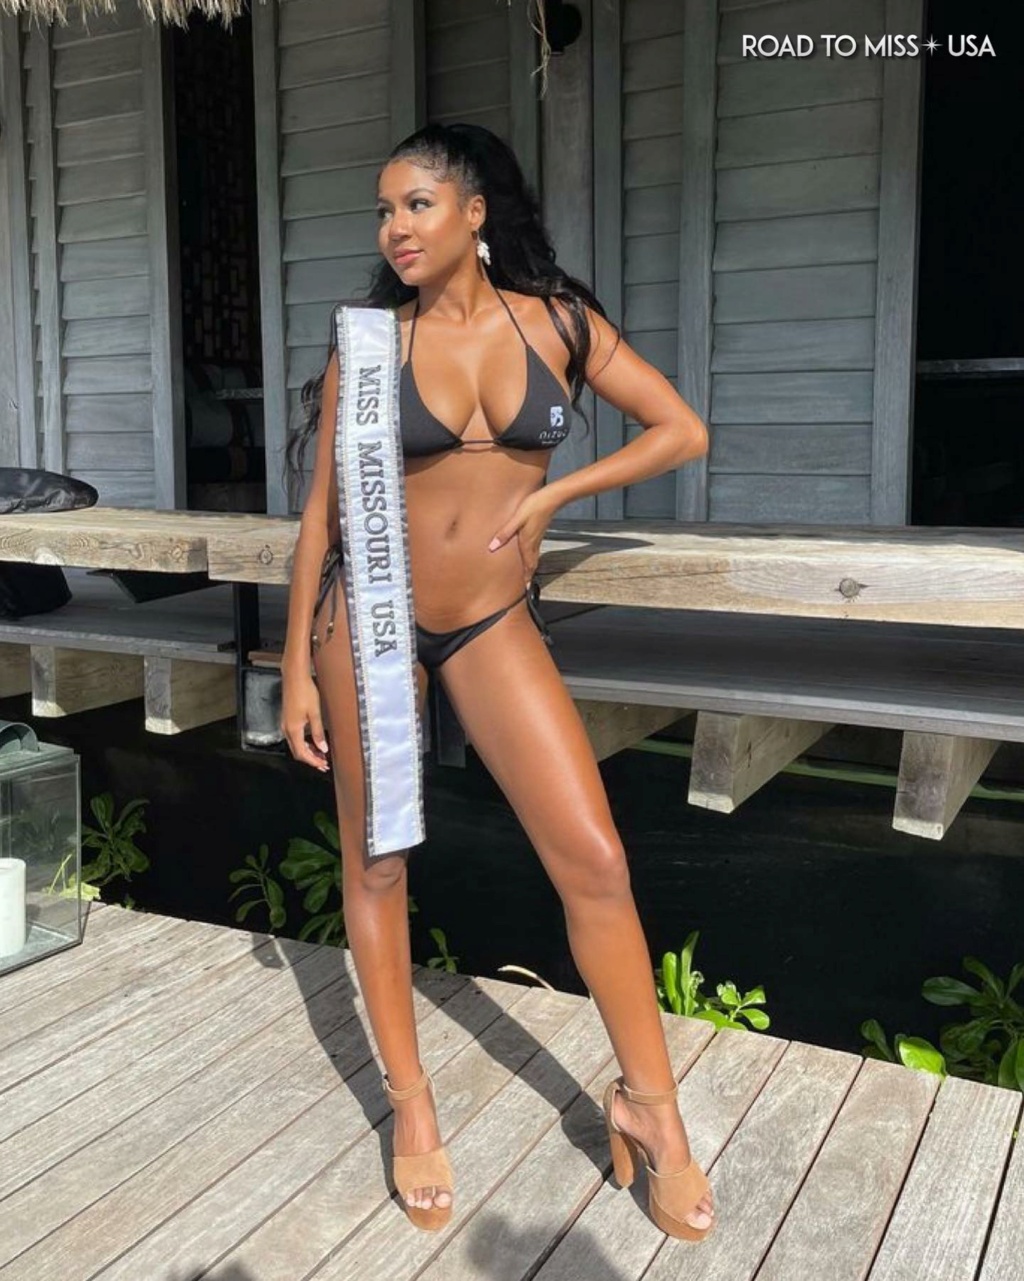 ROAD TO MISS USA 2021 is KENTUCKY! - Page 3 24052412